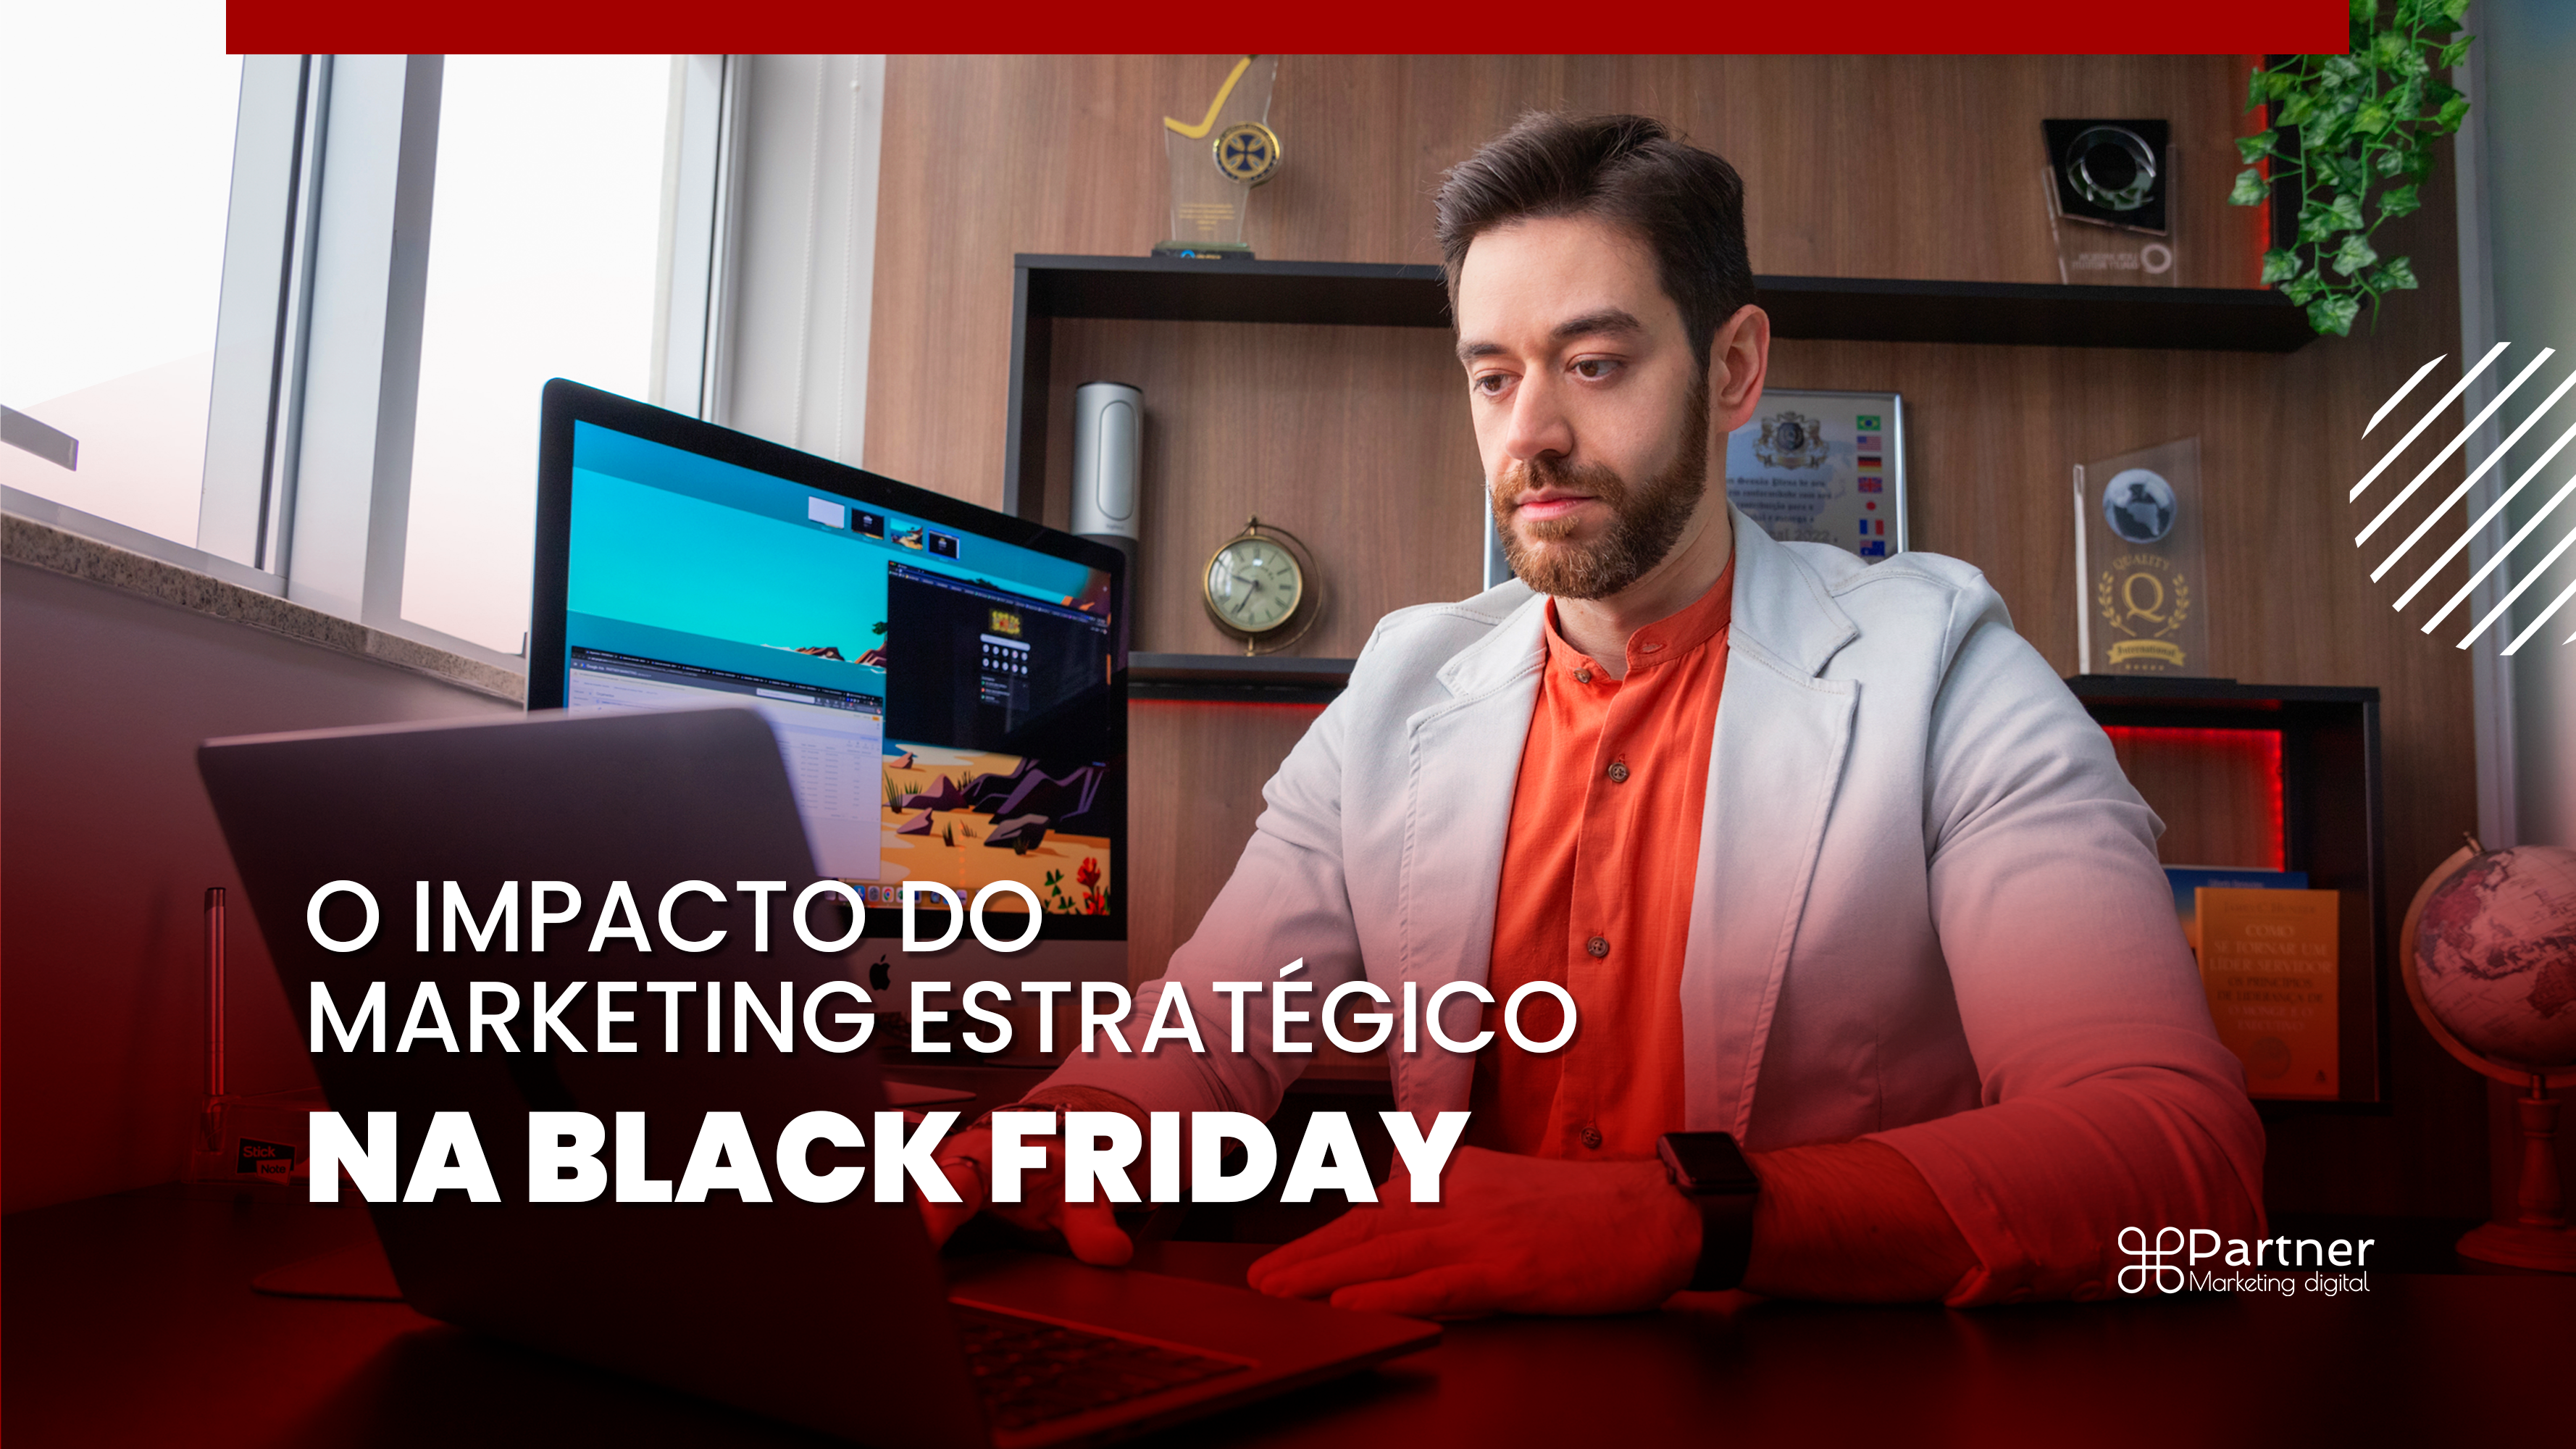 Read more about THE IMPACT OF STRATEGIC MARKETING ON BLACK FRIDAY